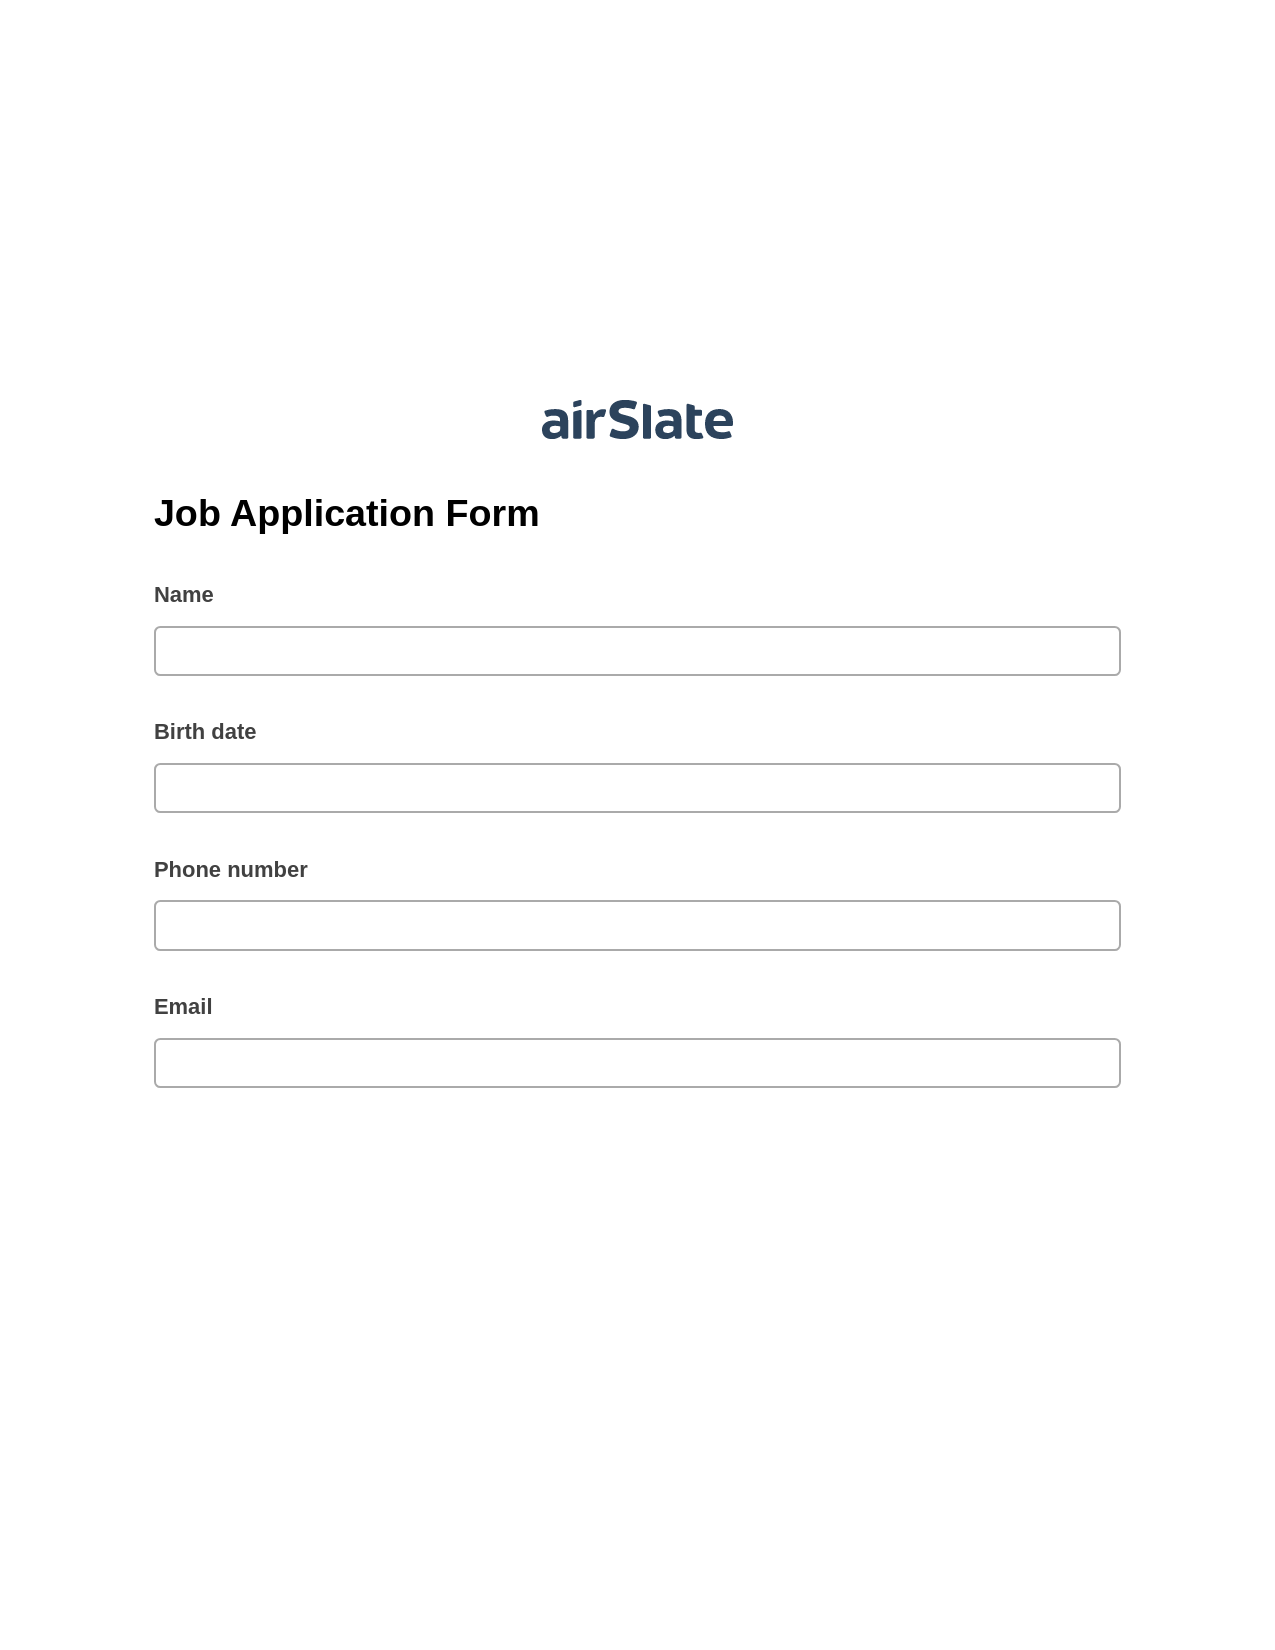 Job Application Form Pre-fill Slate from MS Dynamics 365 Records Bot, Text Message Notification Bot, Export to Formstack Documents Bot